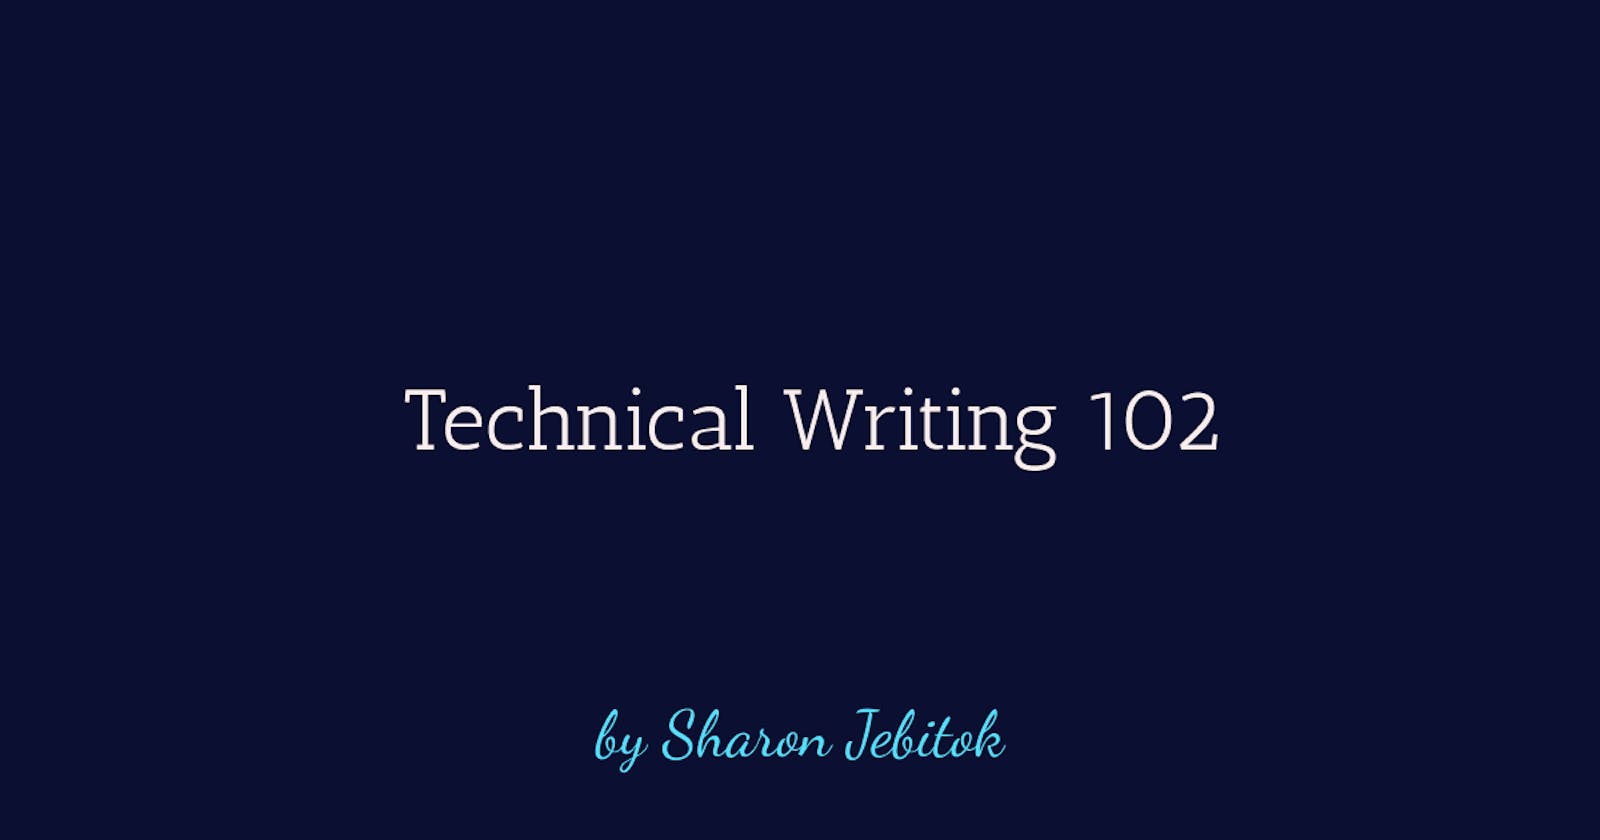 Technical Writing Guide and Tips